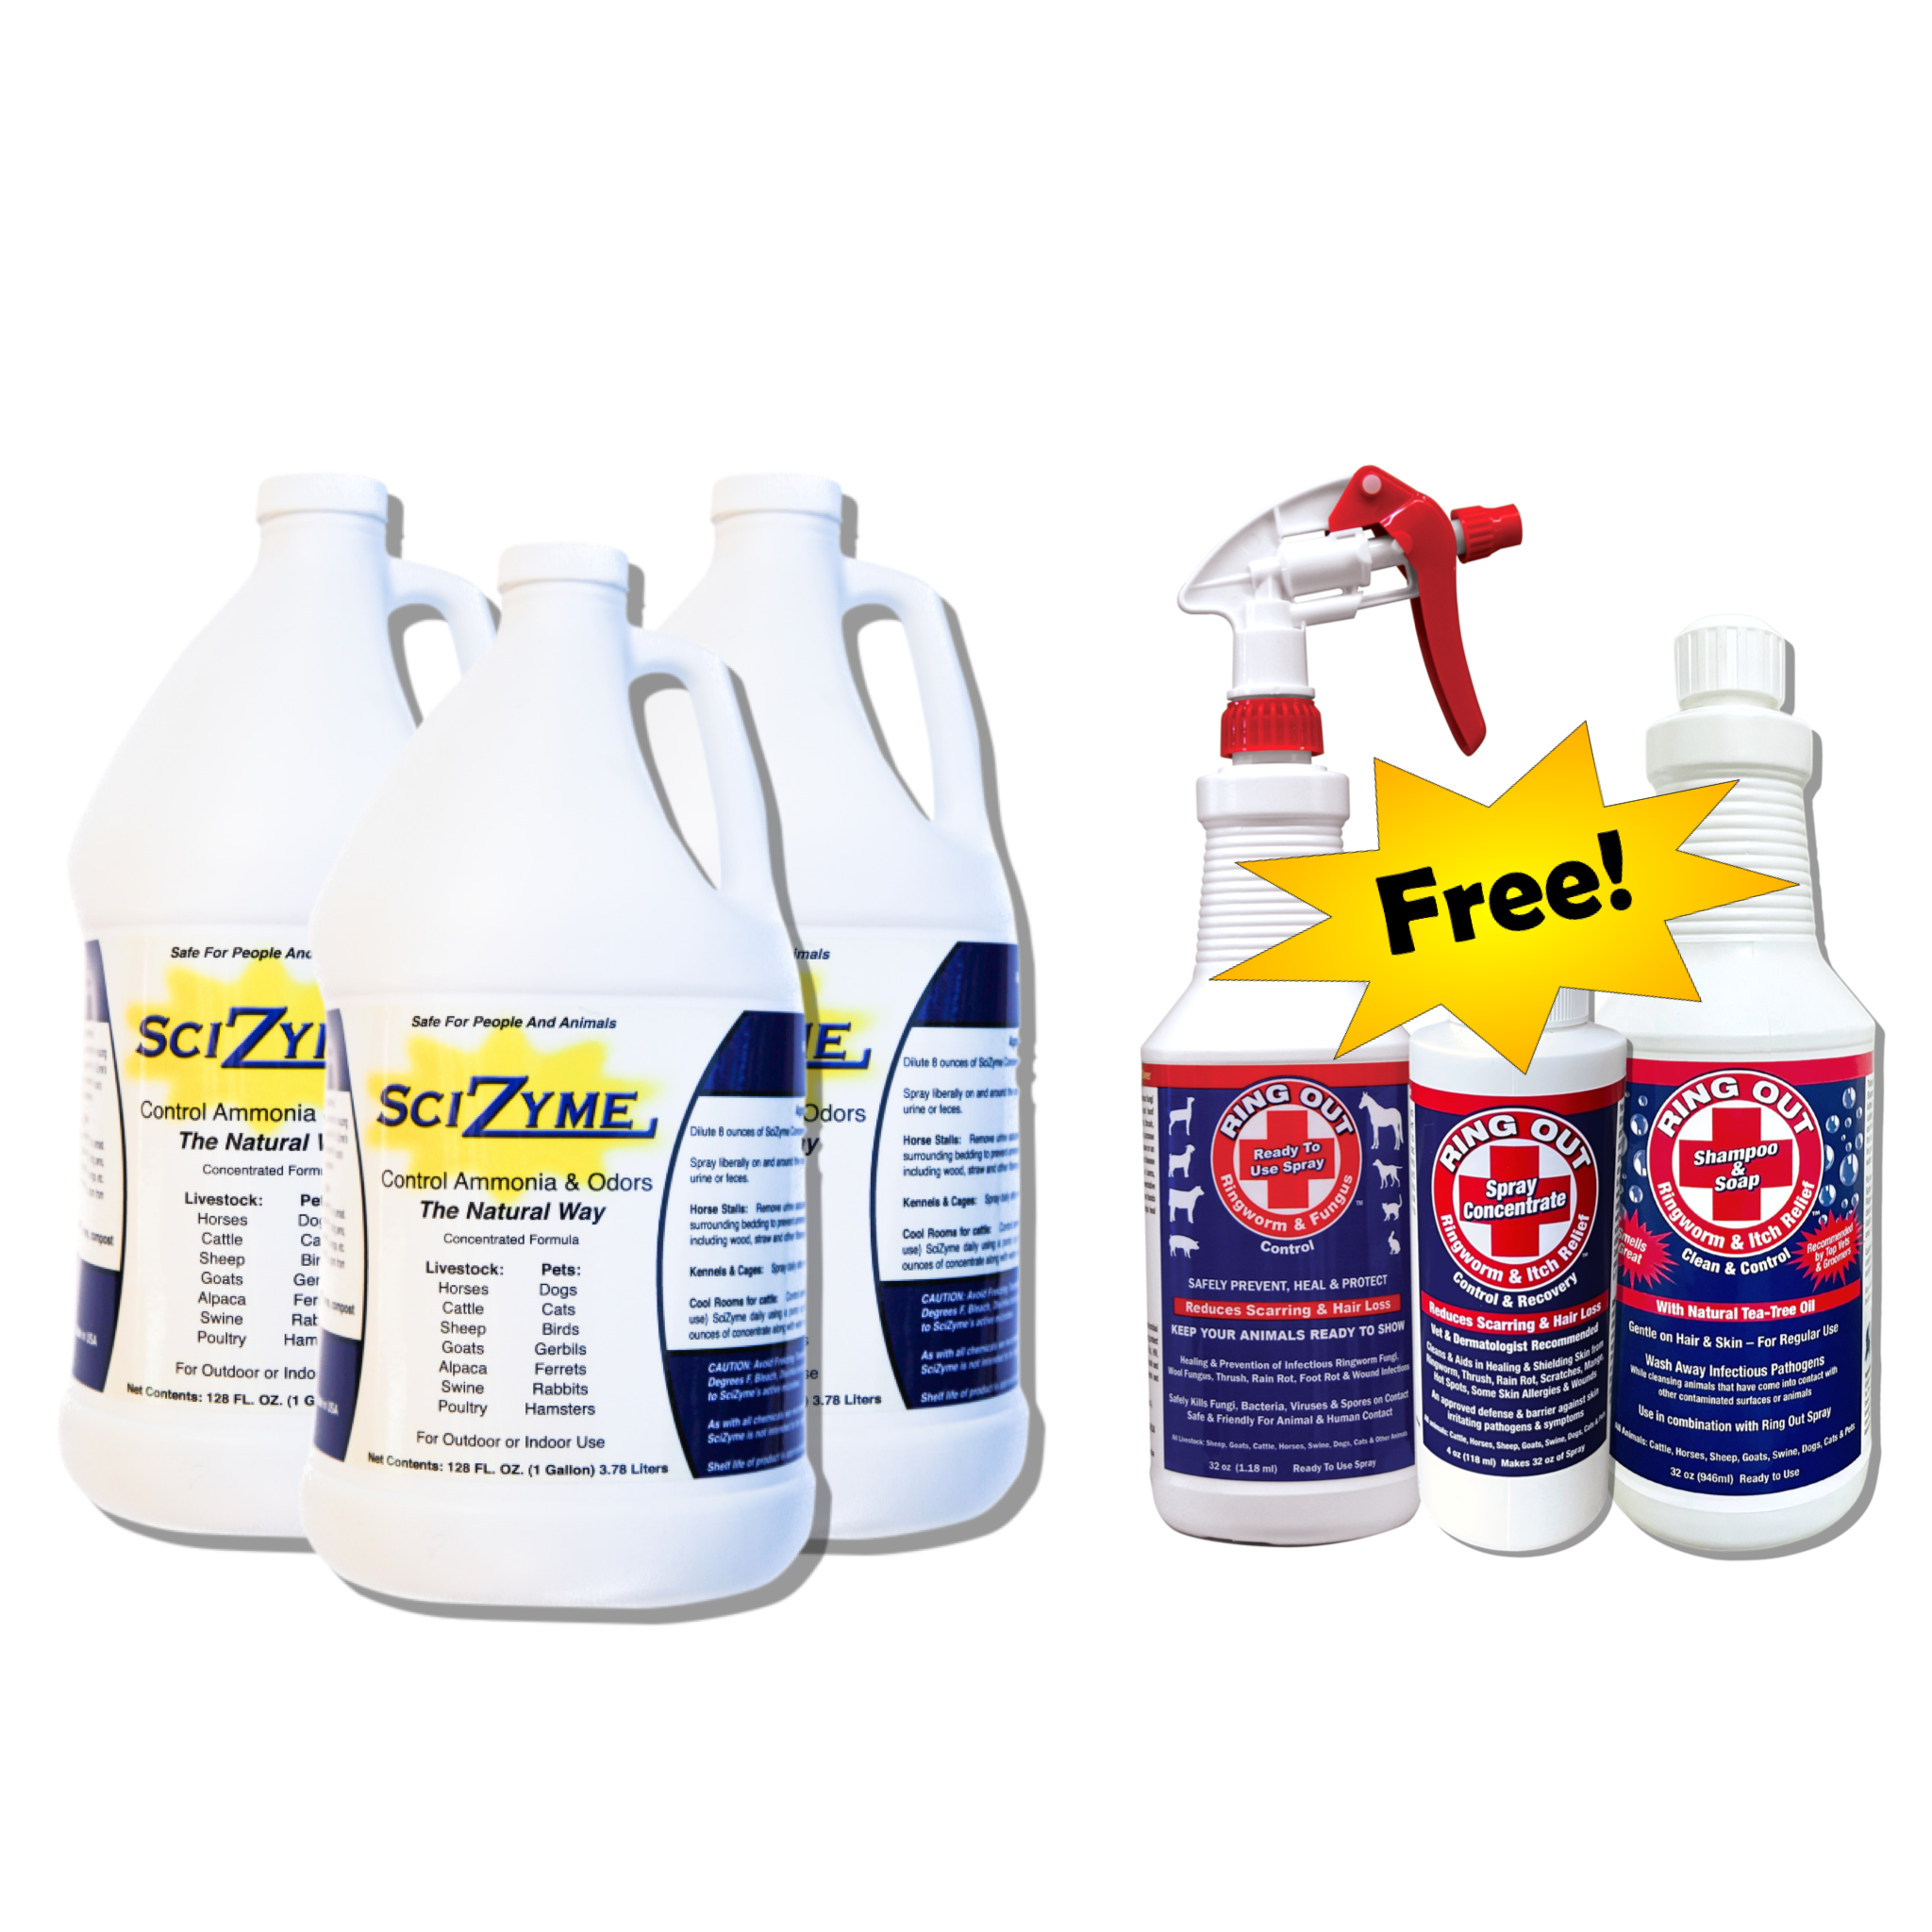 SciZyme Special - 3 Gallons w/ FREE ringworm prevention pack